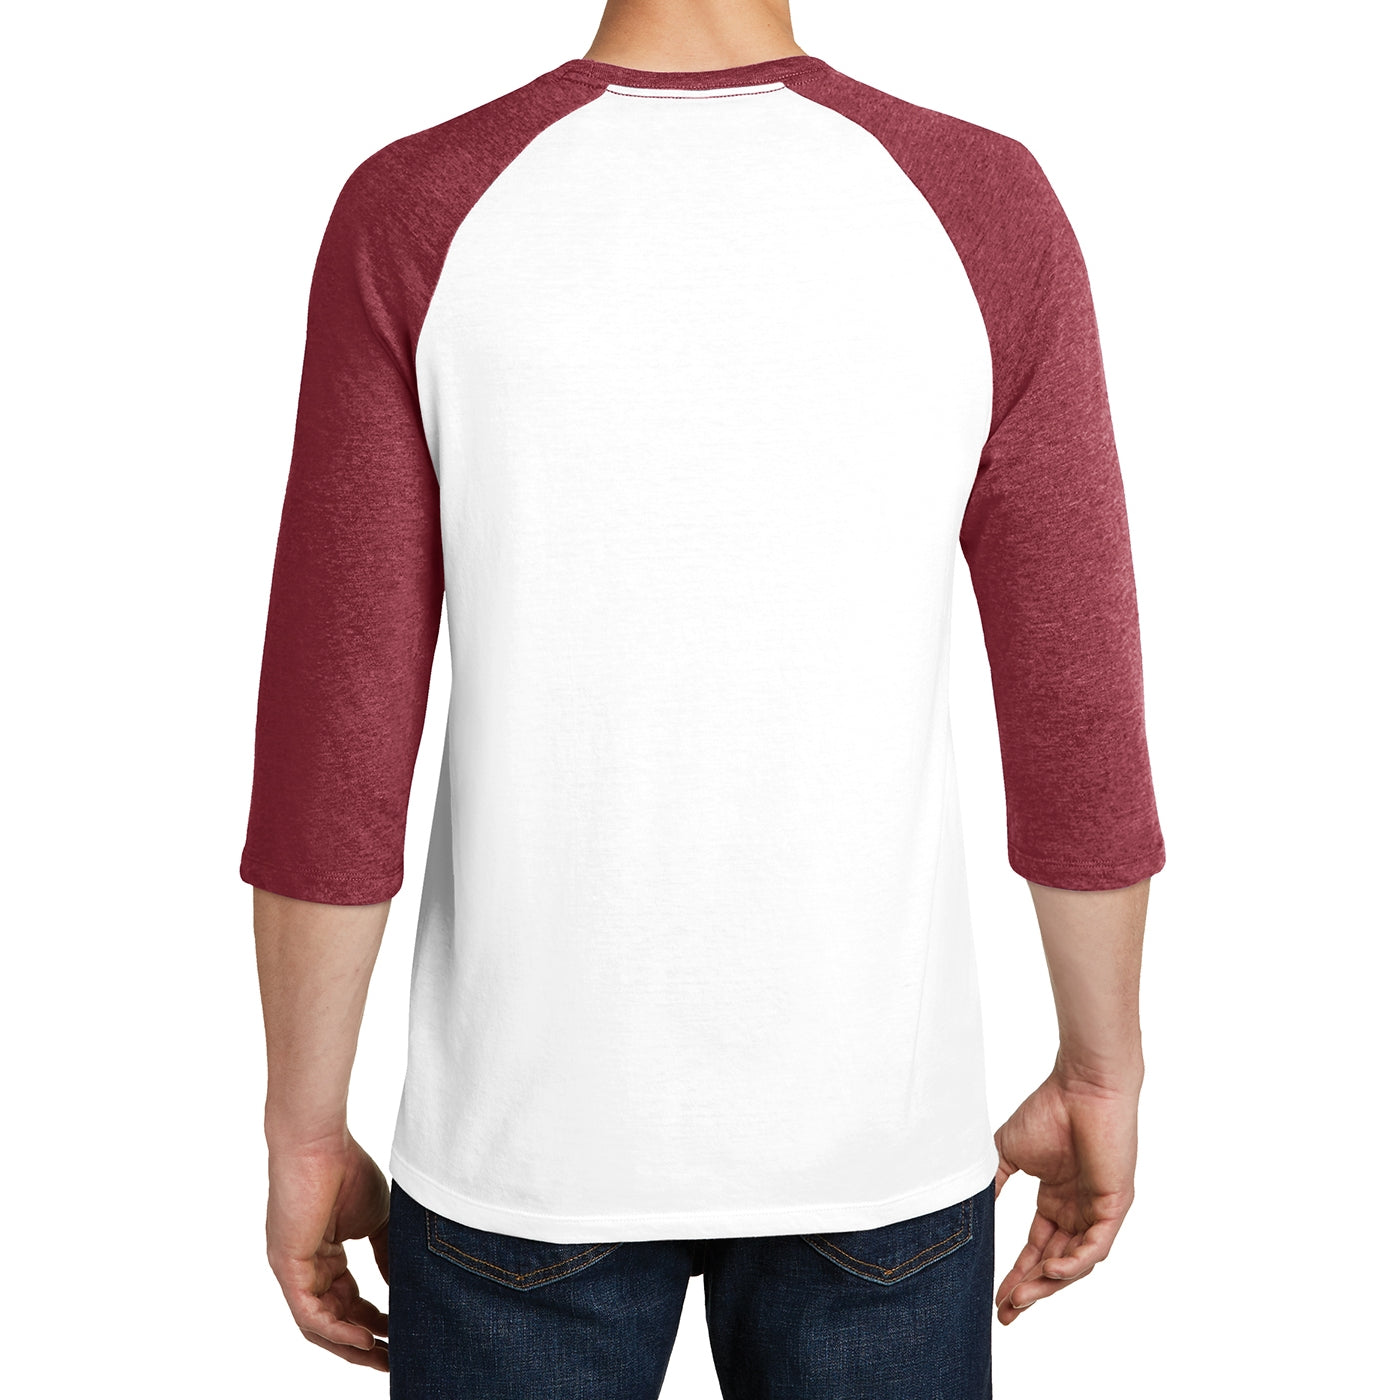 Men's Young  Very Important Tee 3/4-Sleeve Raglan - Heathered Red/ White